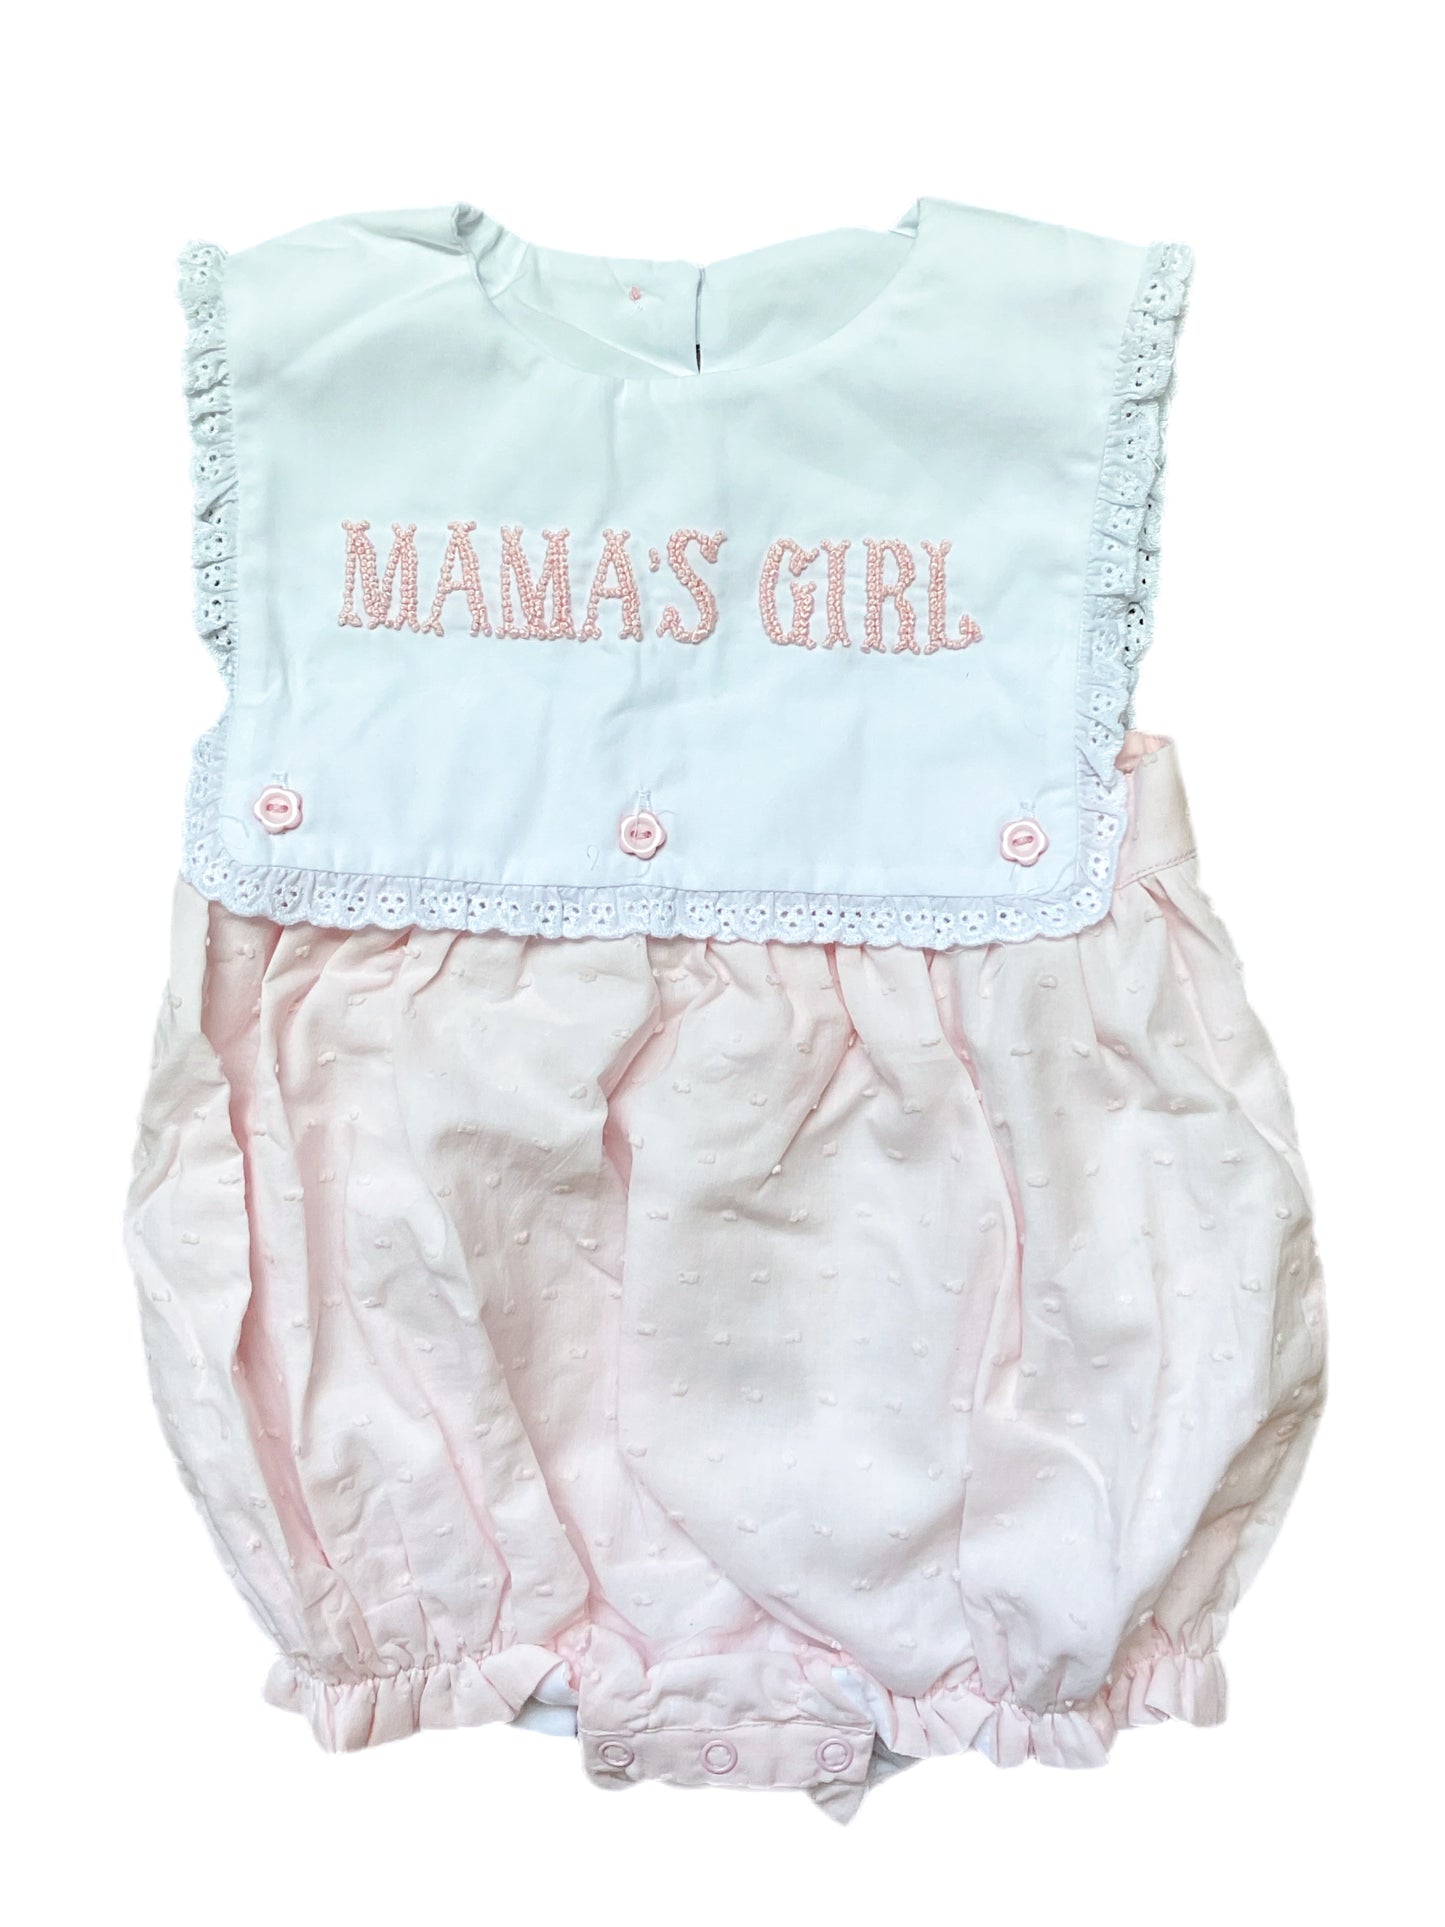 Girl’s French Knot Name Bubble will say MAMA’S GIRL (can not personalize)